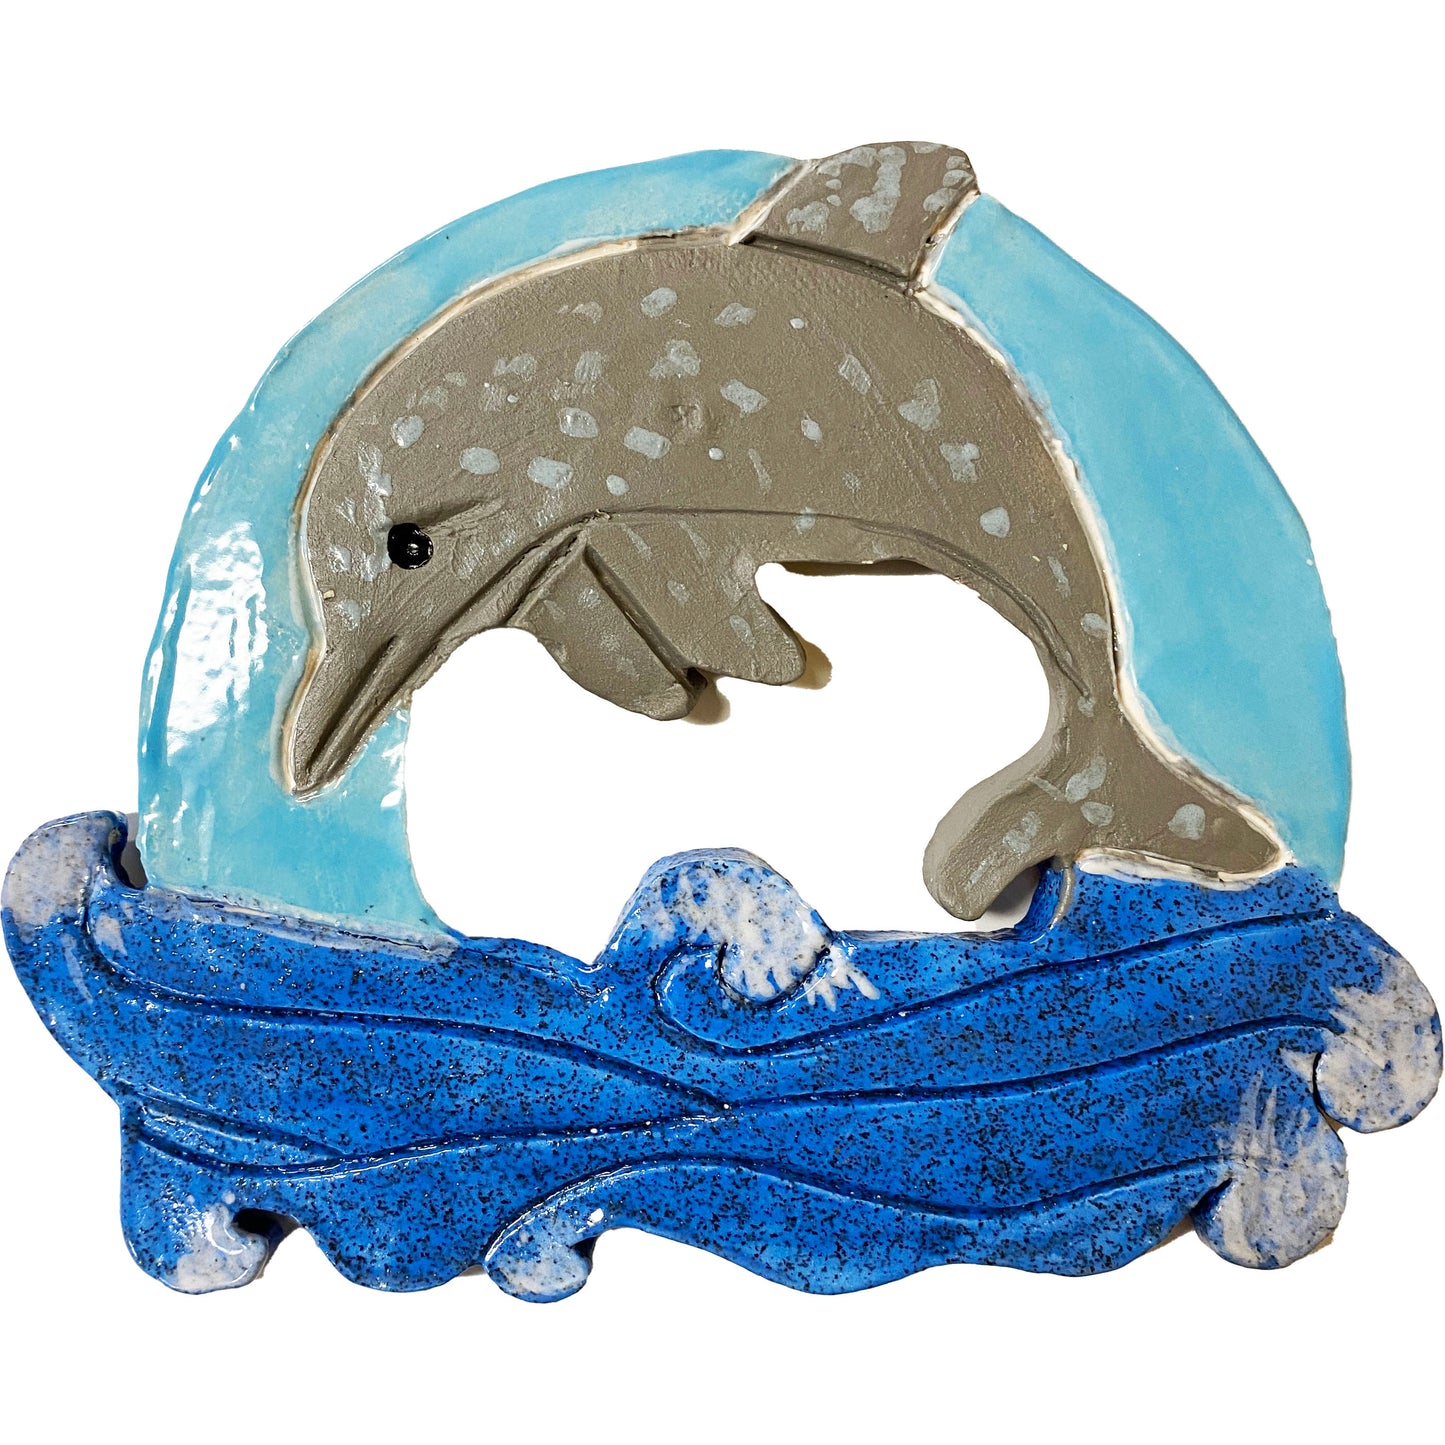 Ceramic Arts Handmade Clay Crafts Fresh Fish Glazed 7-inch x 6-inch Dolphin made by Eric Stacy